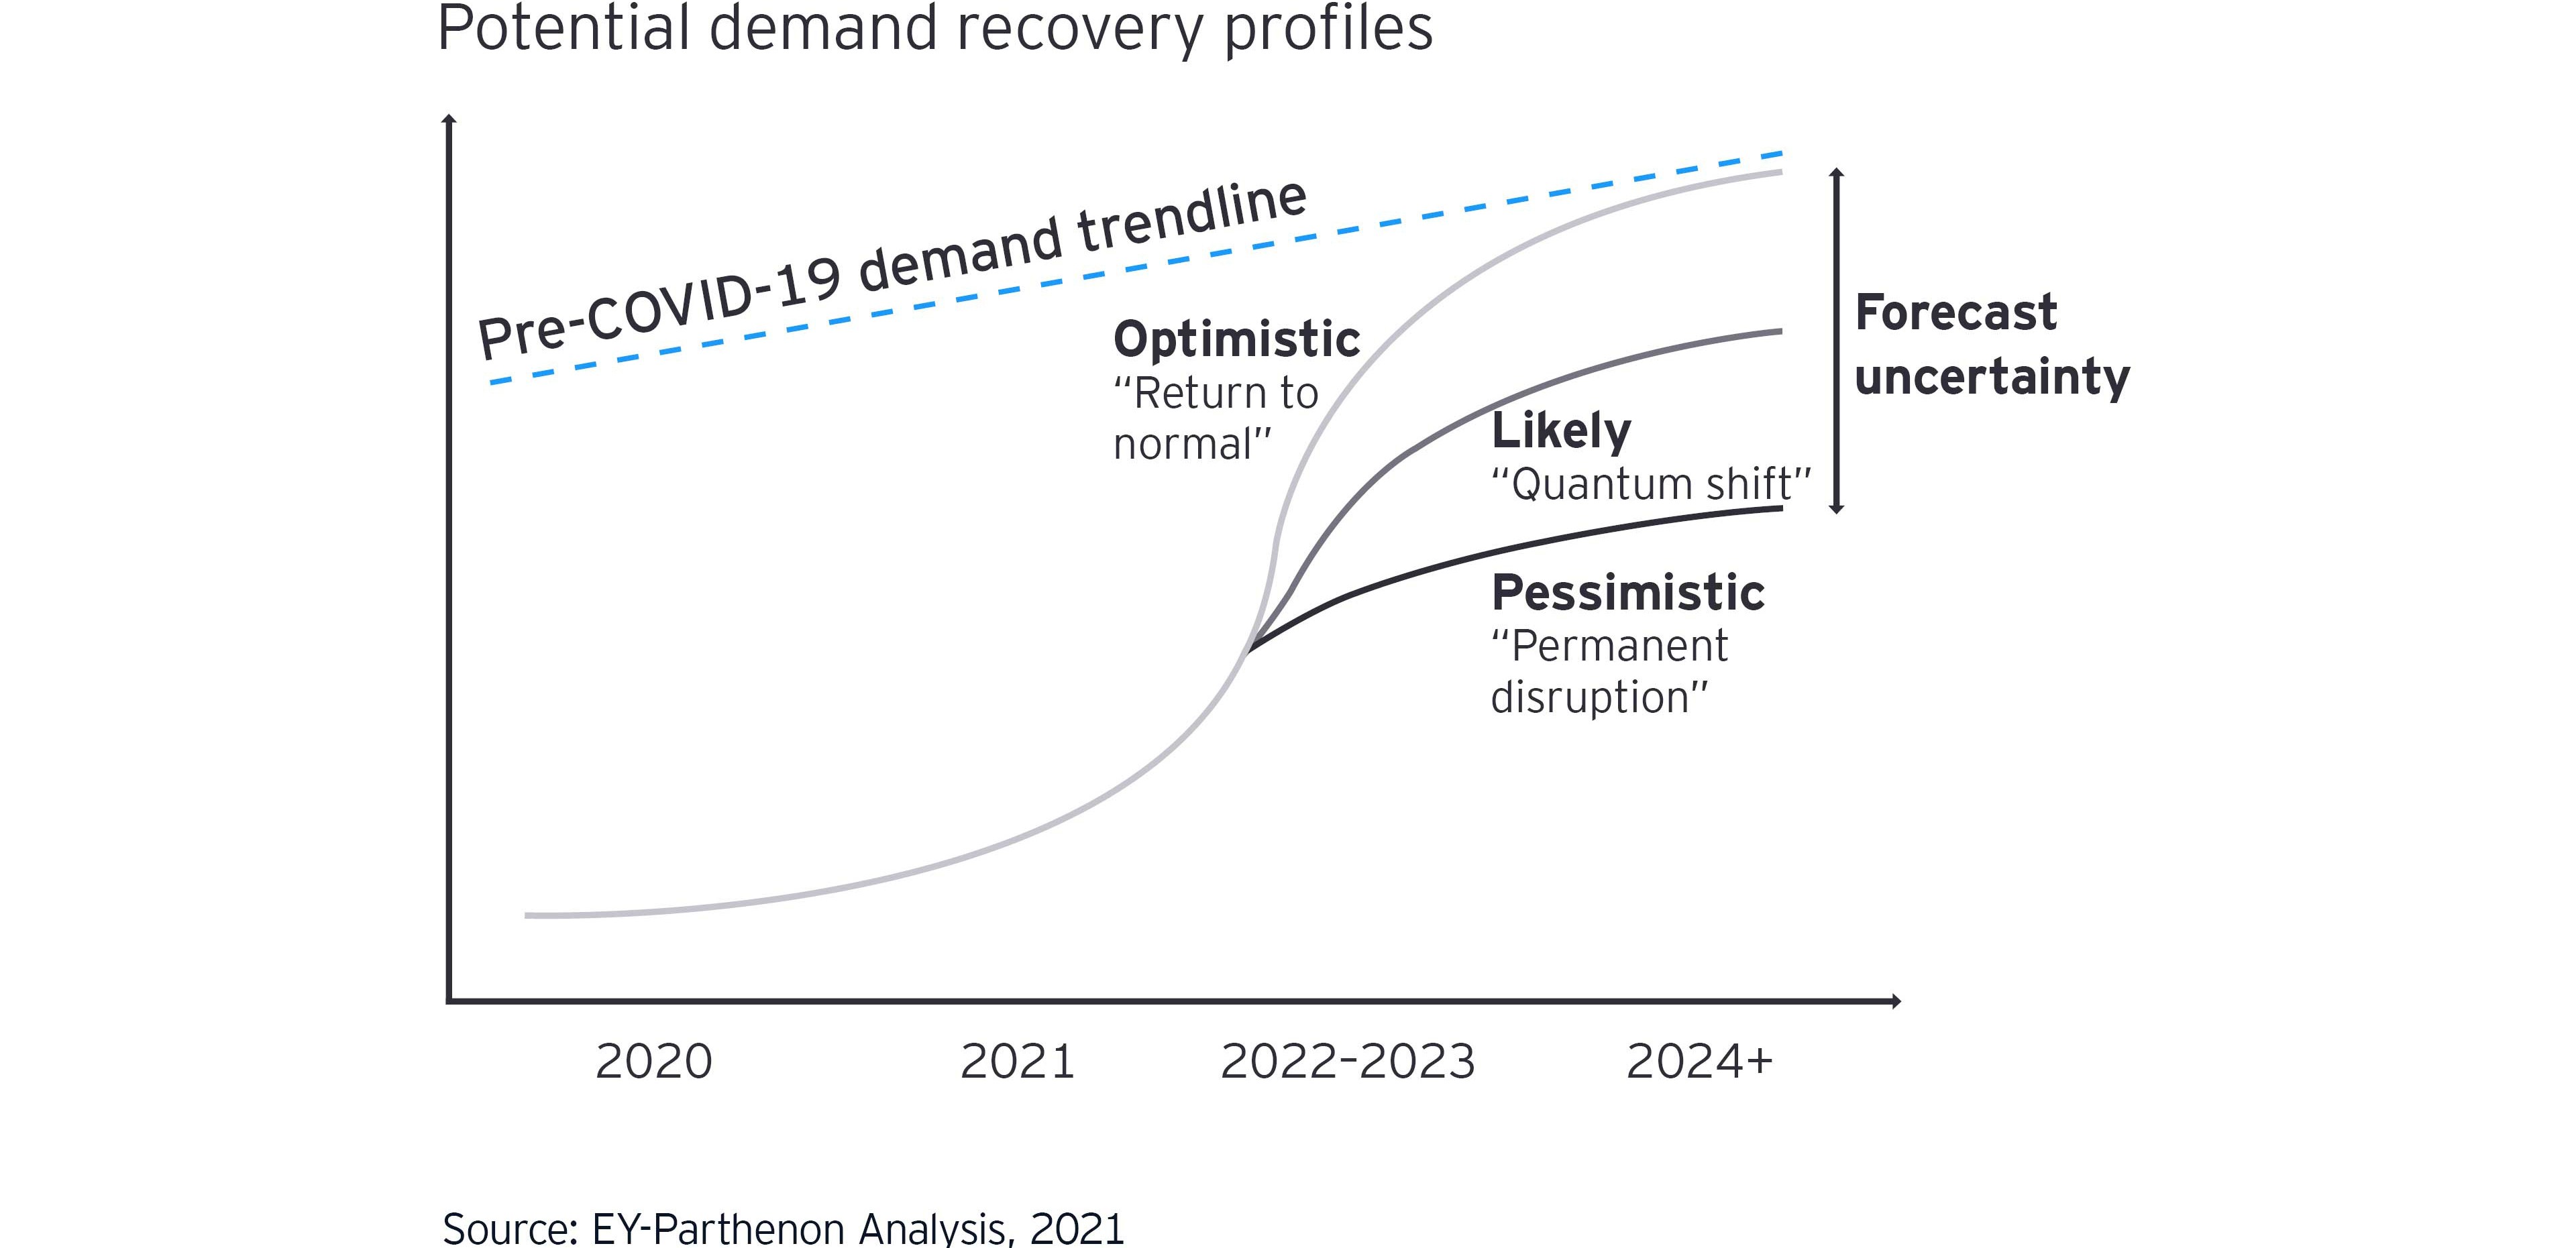 Potential demand recovery profiles